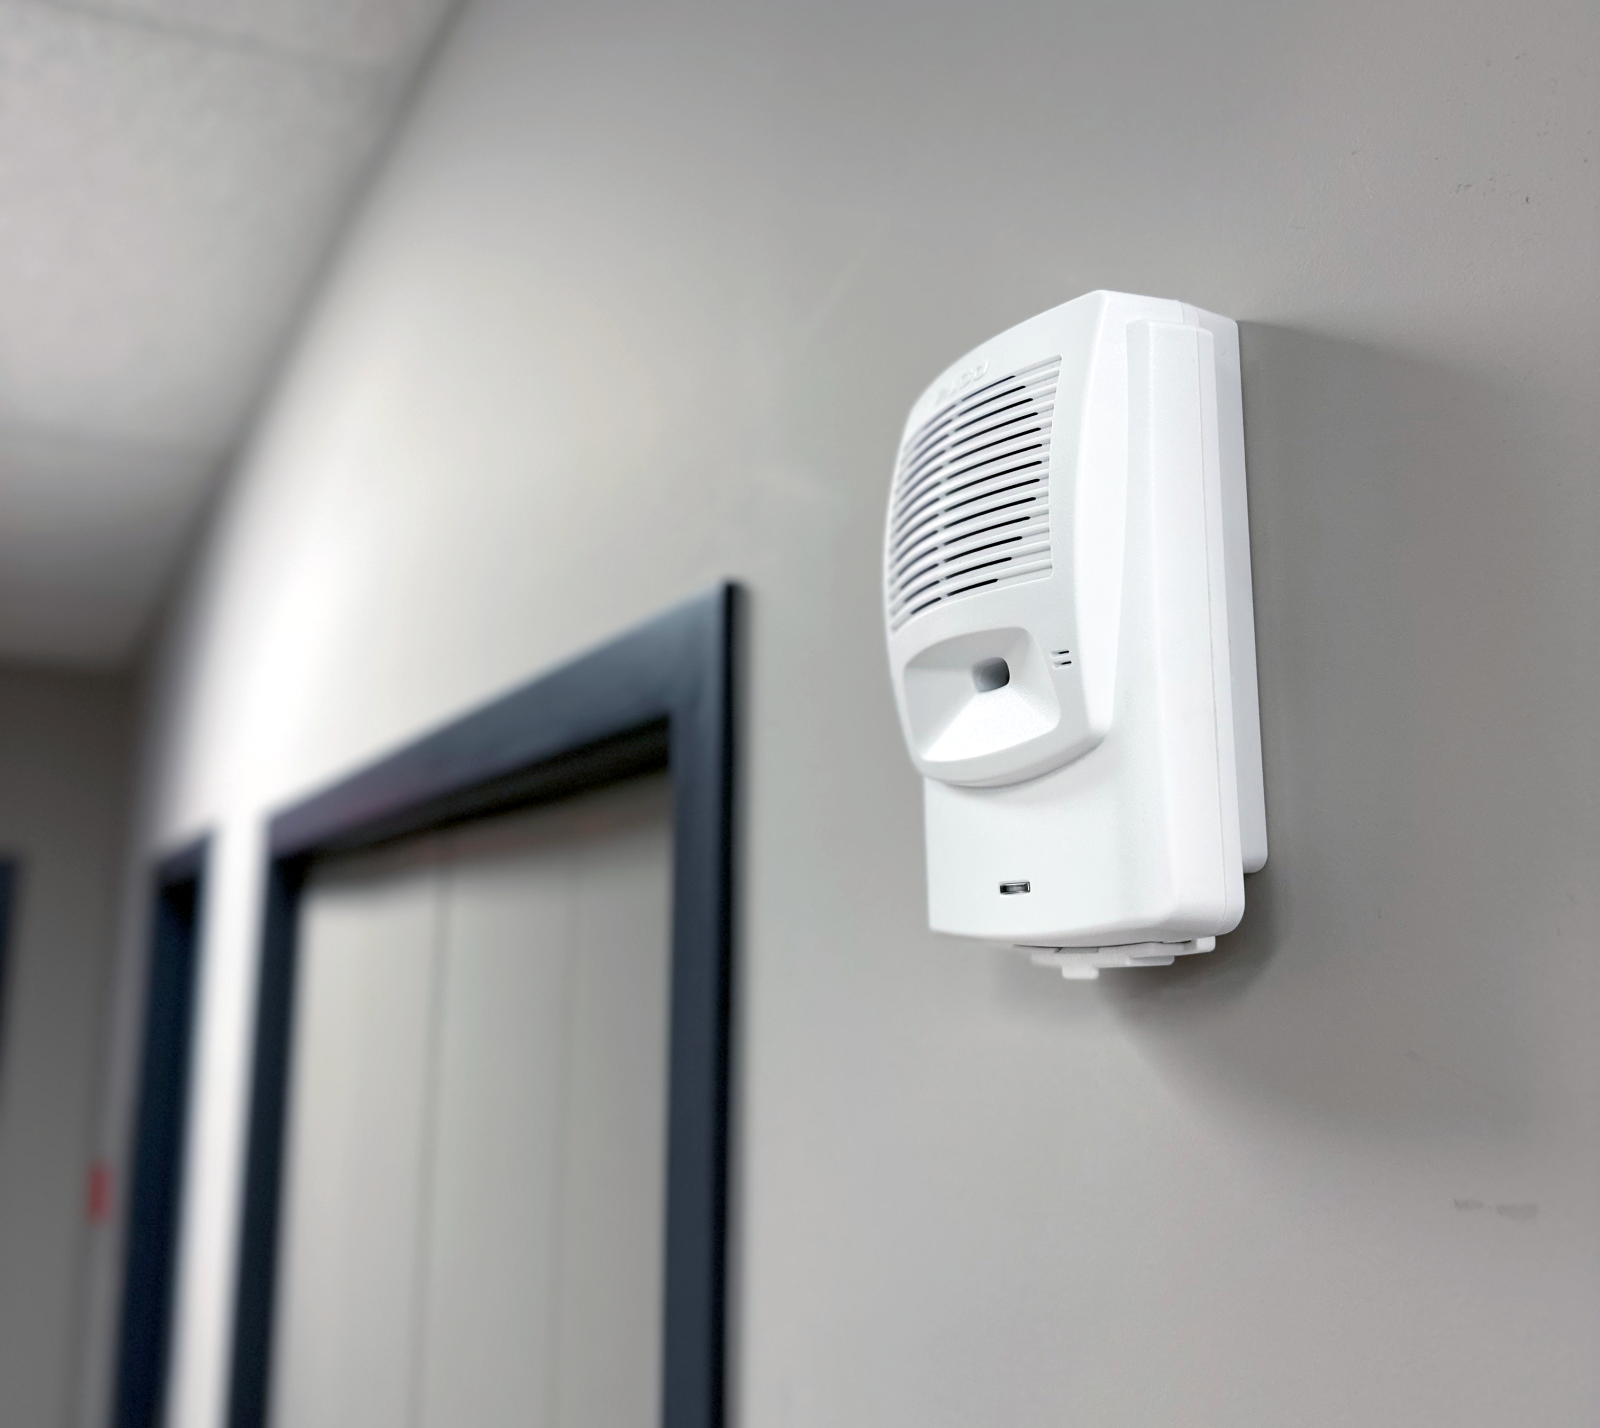 Image of Algo 8180 Audio Alerter mounted on a wall in a hallway for loud alerting.